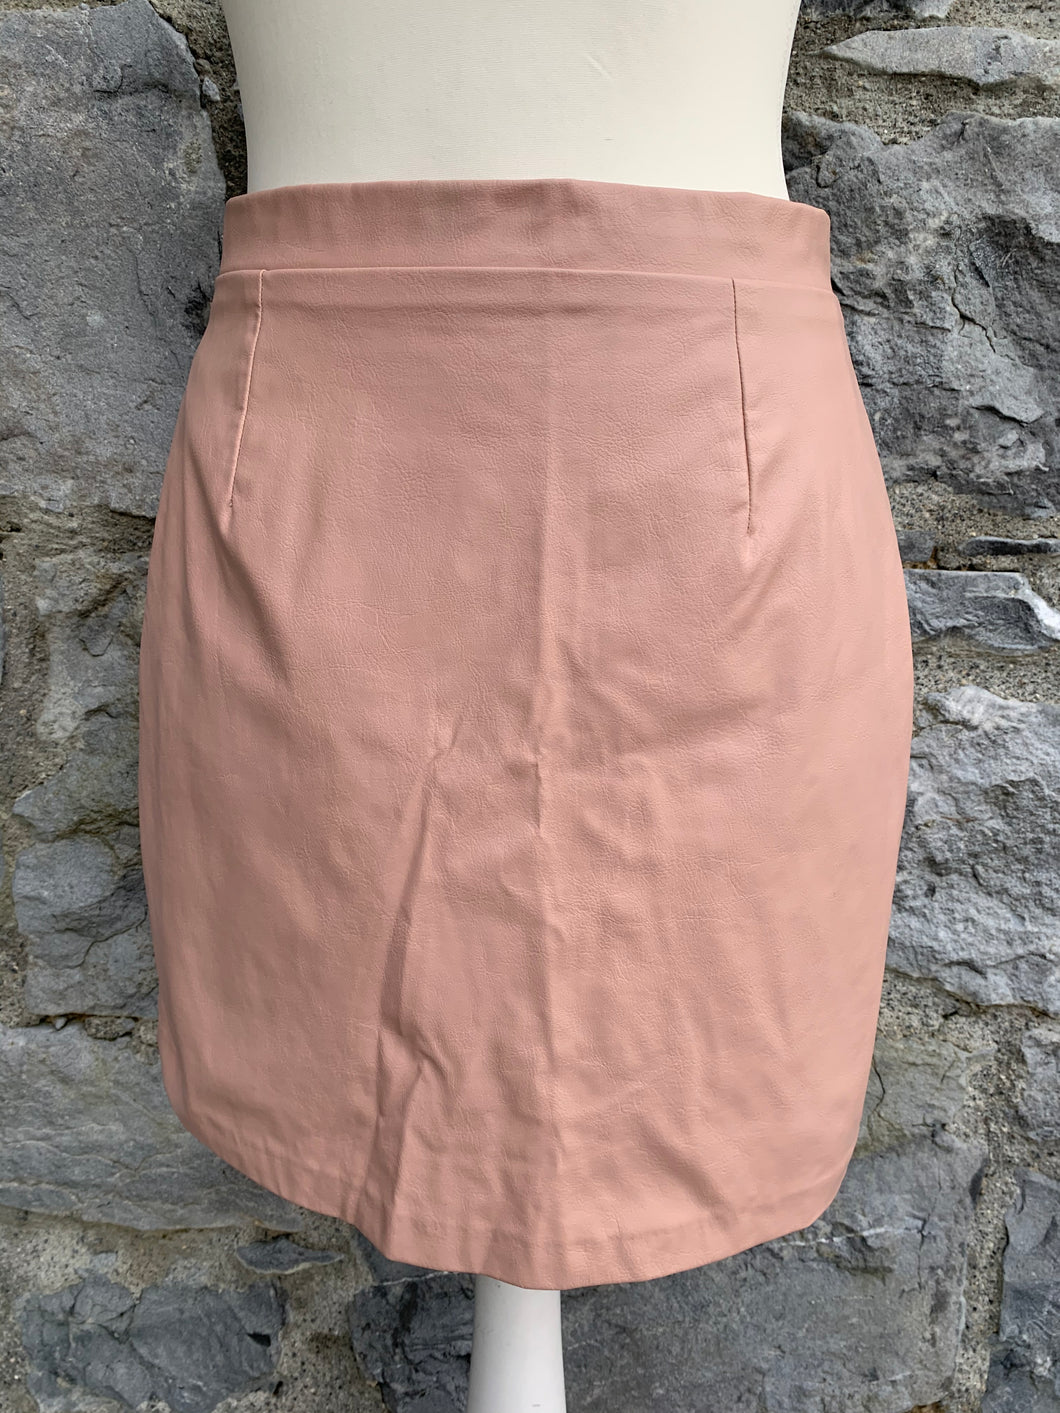 Faux leather pink skirt  uk 10